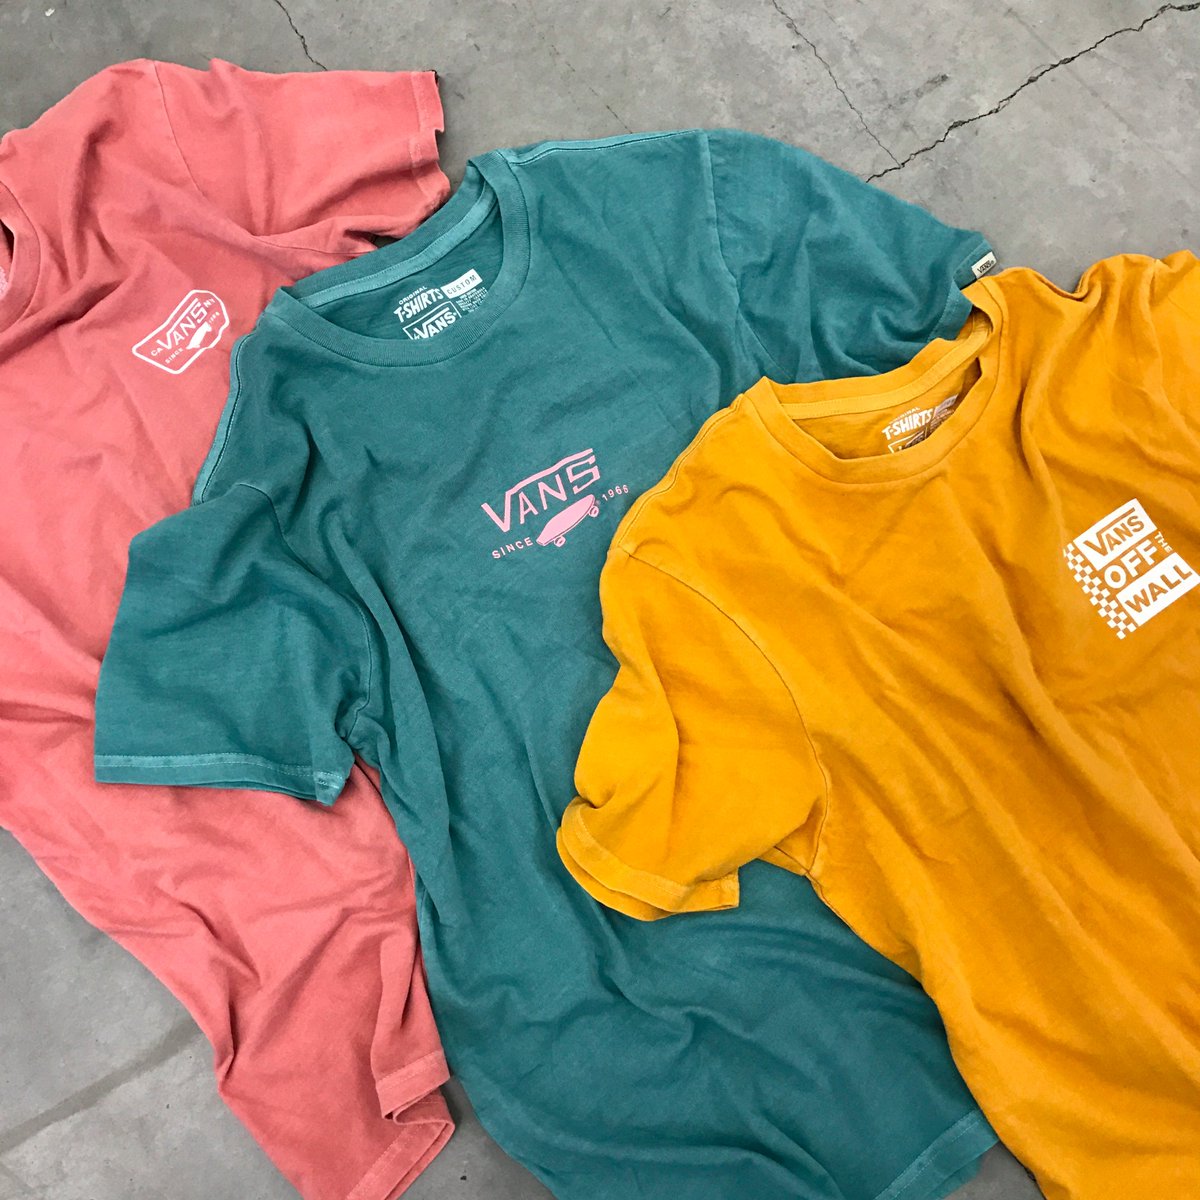 The Vans Pigment tees are out now 